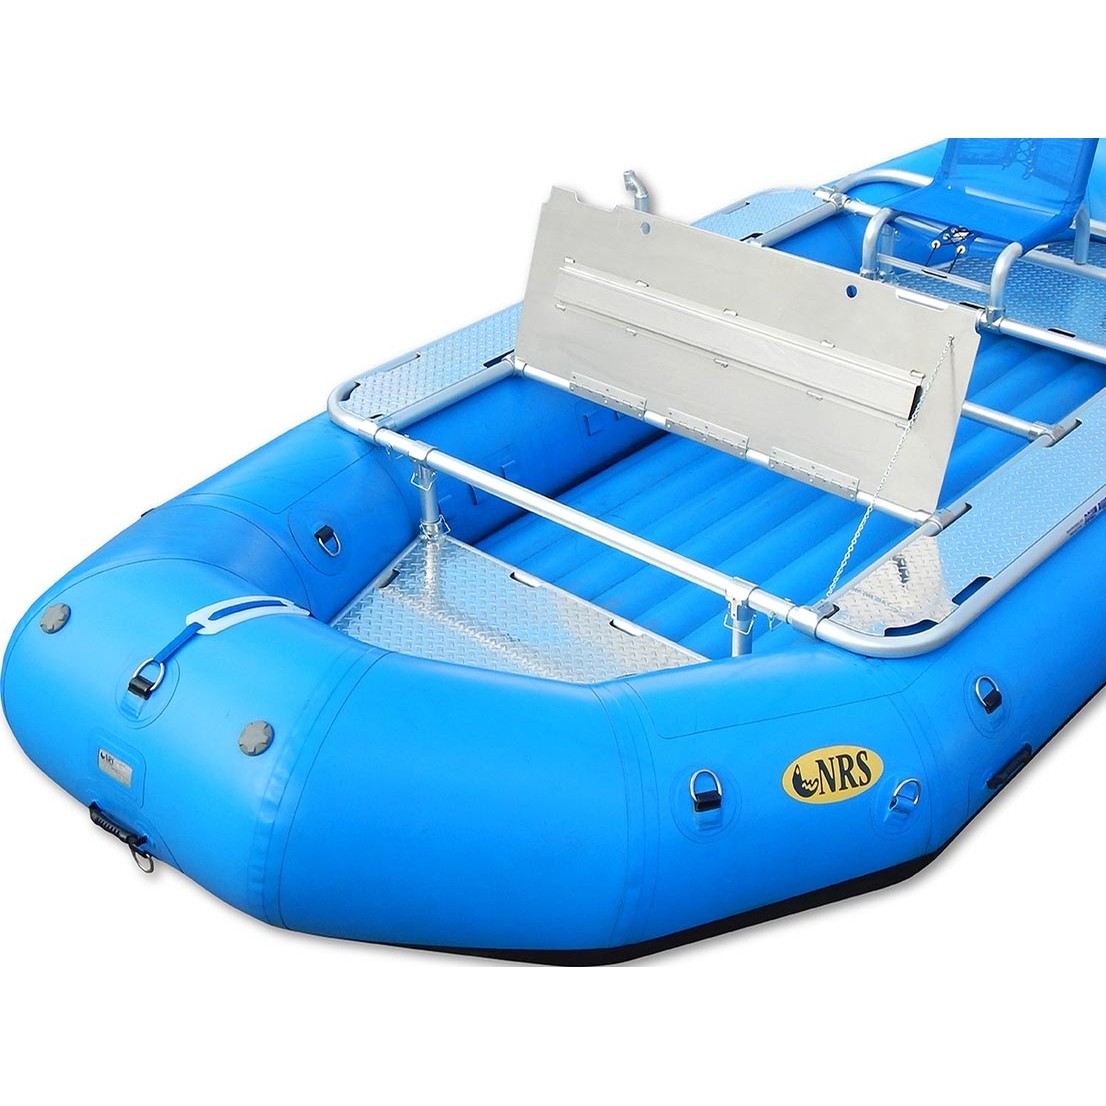 https://www.companybe.com/DownRiverEquipment/product_photos/rd_images/rd_Down-River-Equipment-Aluminum-Hinged-Frame-Hatch-Open.jpg